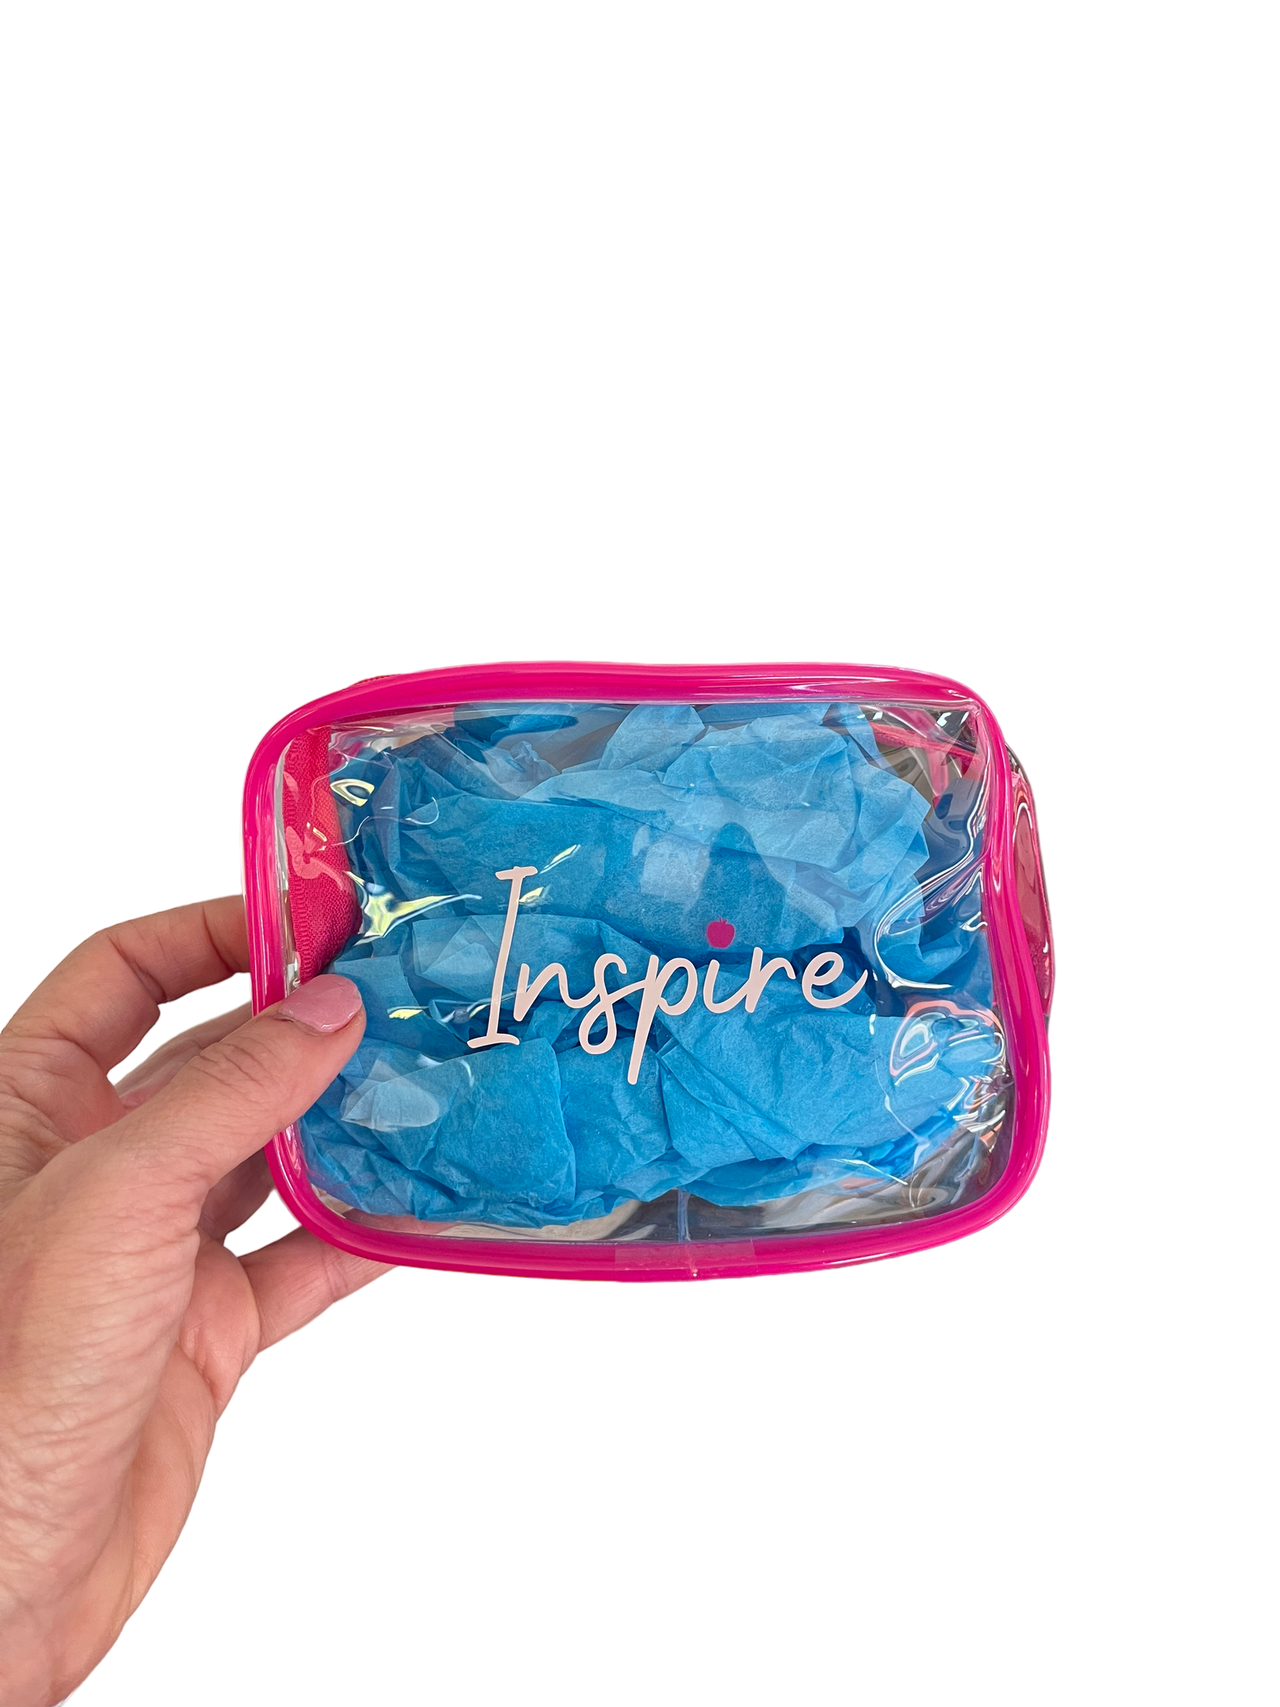 Inspire clear cosmetic bag